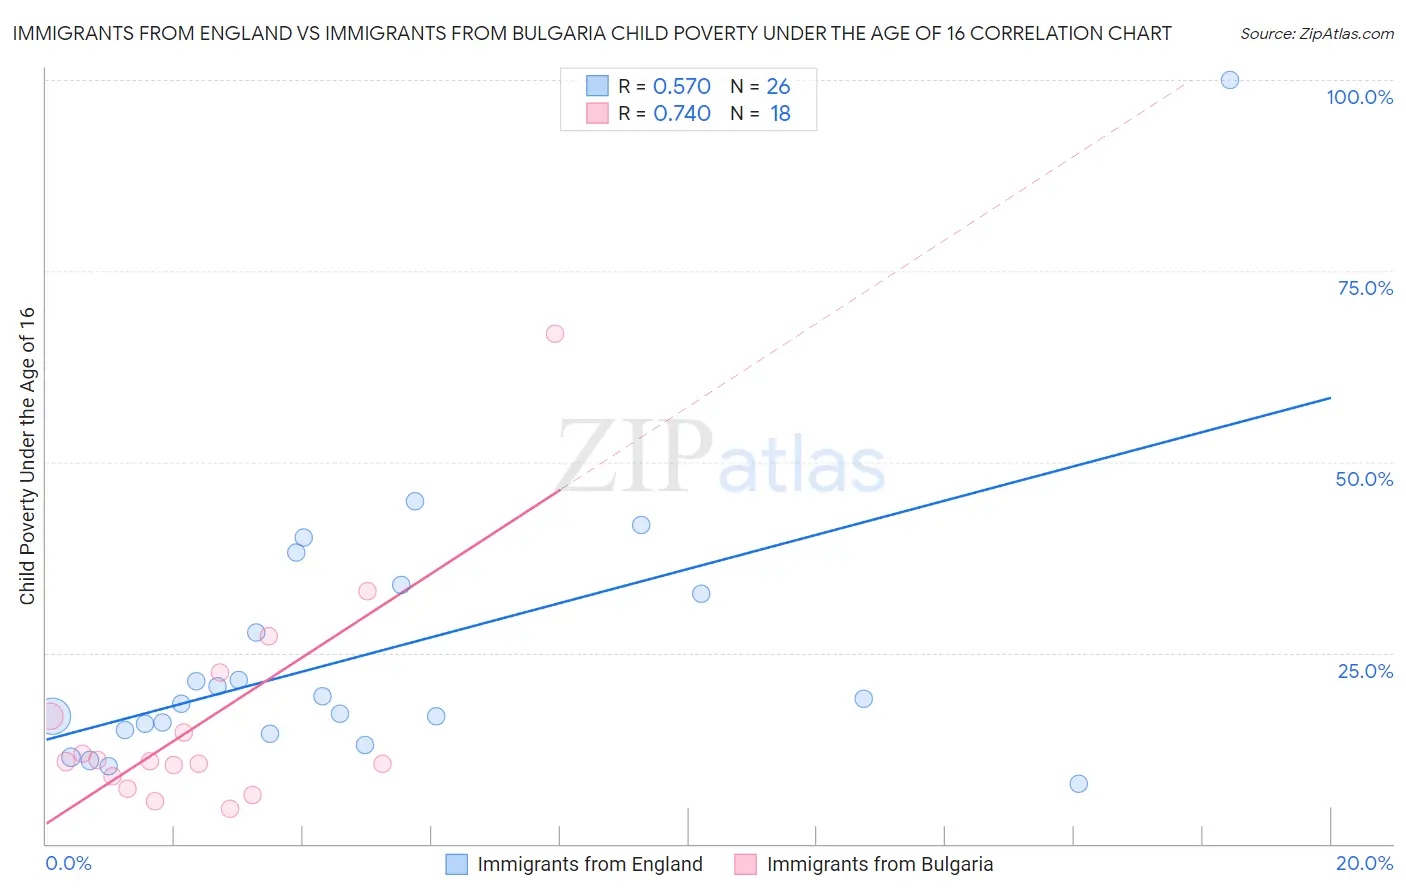 Immigrants from England vs Immigrants from Bulgaria Child Poverty Under the Age of 16